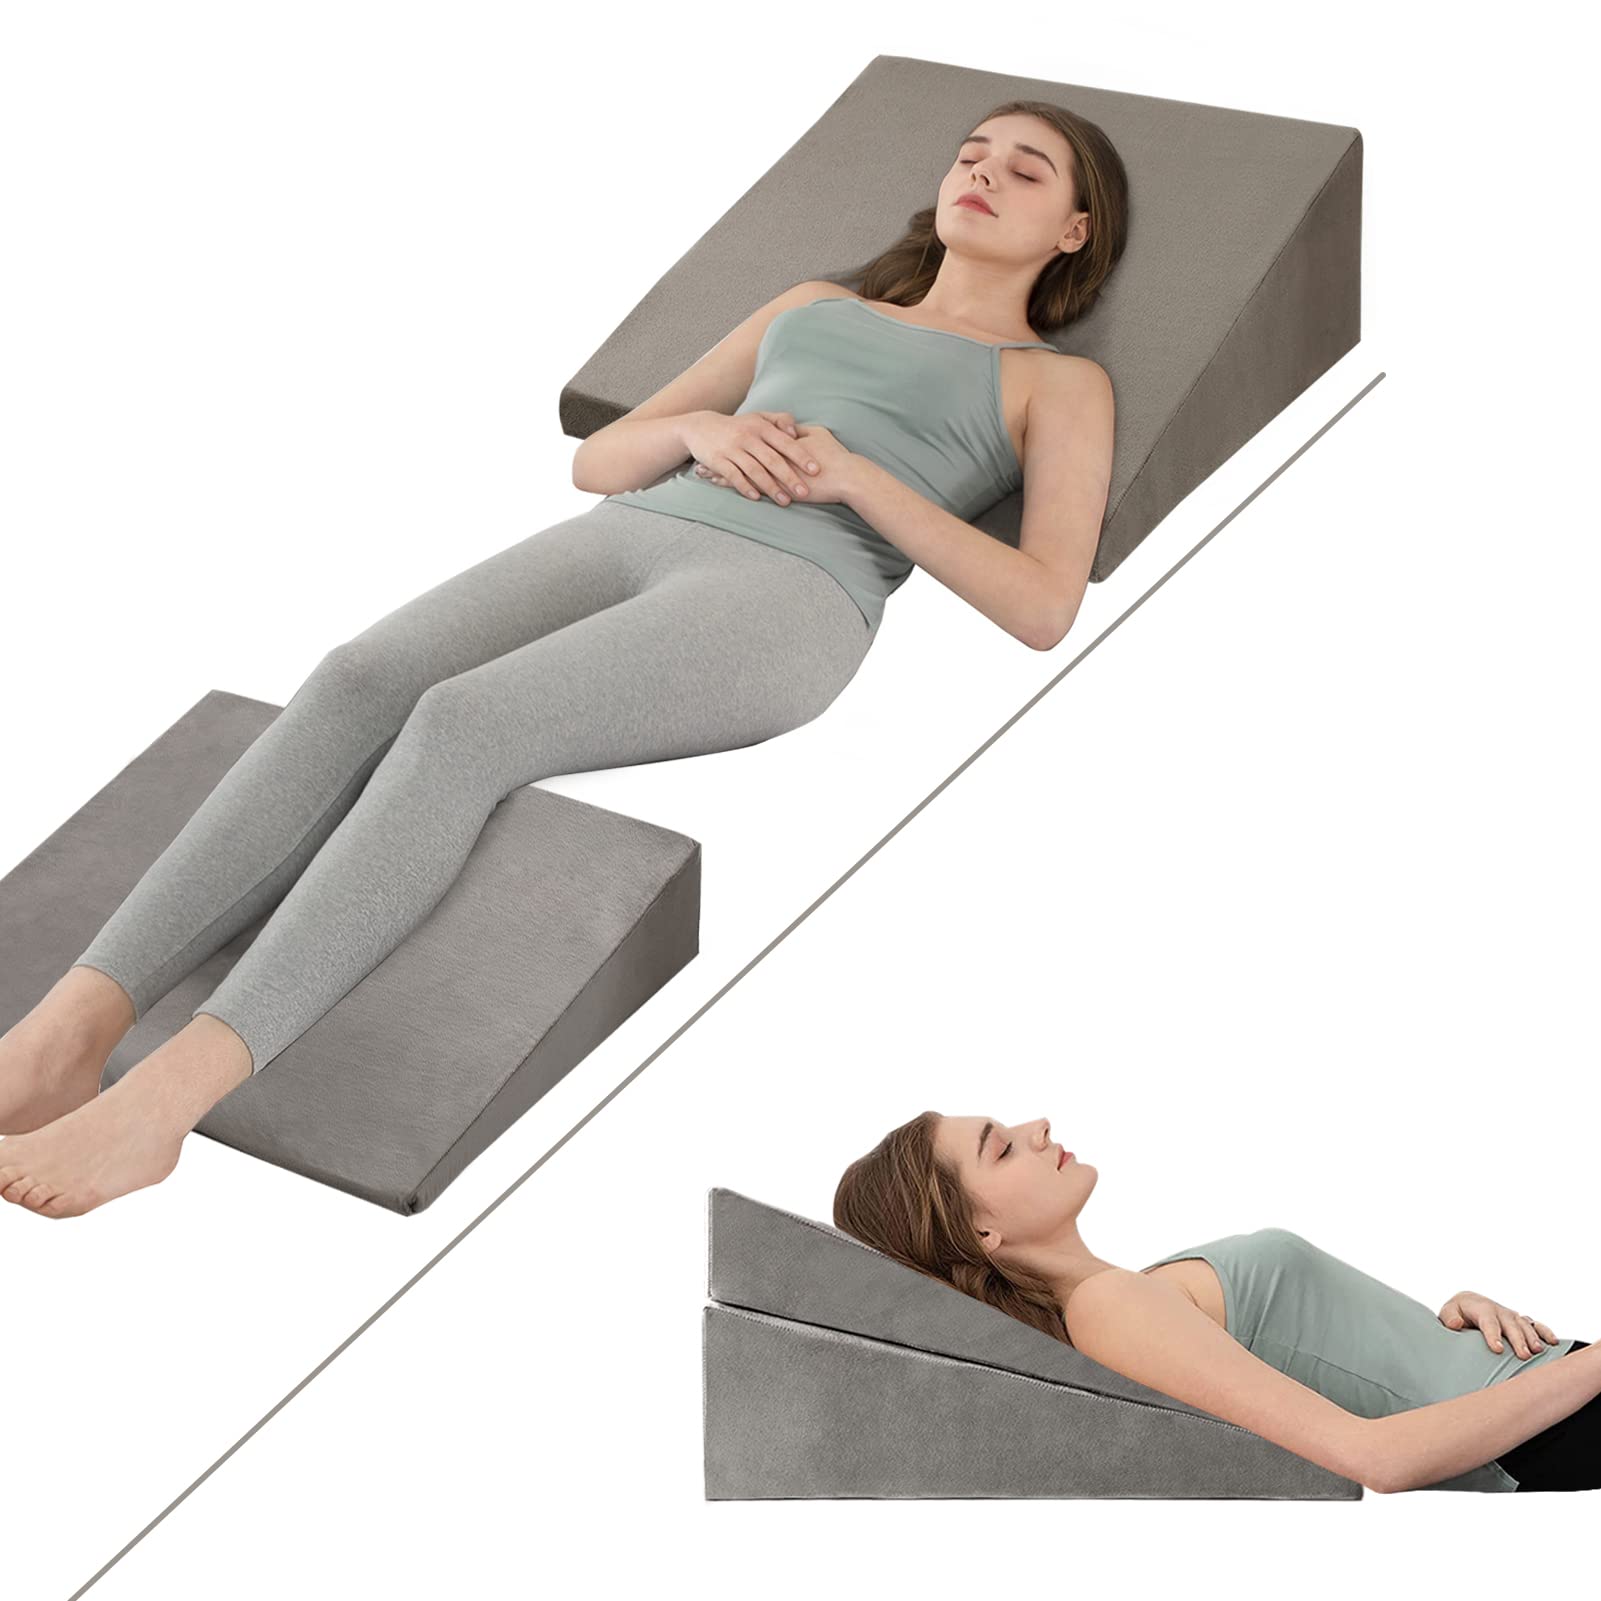 Bed Wedge Pillow – 3 in 1 Adjustable to 4.5, 7.5 & 12 Inches Foam Bed Wedge  Pillow Leg Elevation Pillow for Sleeping, Acid Reflux, Anti Snore, Help for  Back & Leg Pain,Grey Grey 4.5, 7.5 & 12 Inch